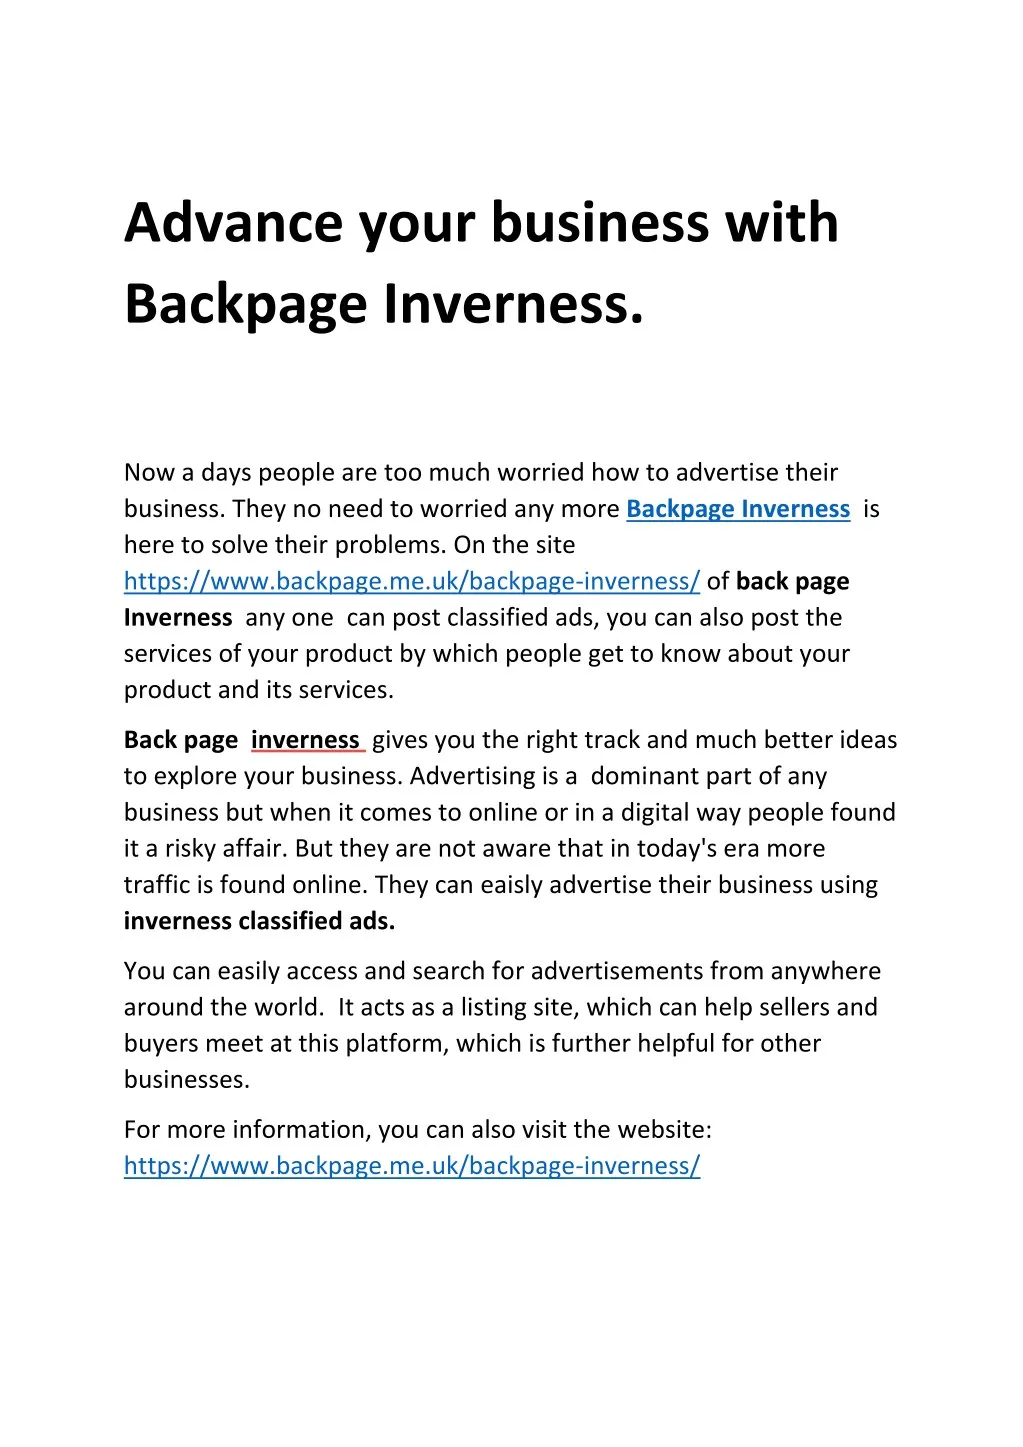 advance your business with backpage inverness